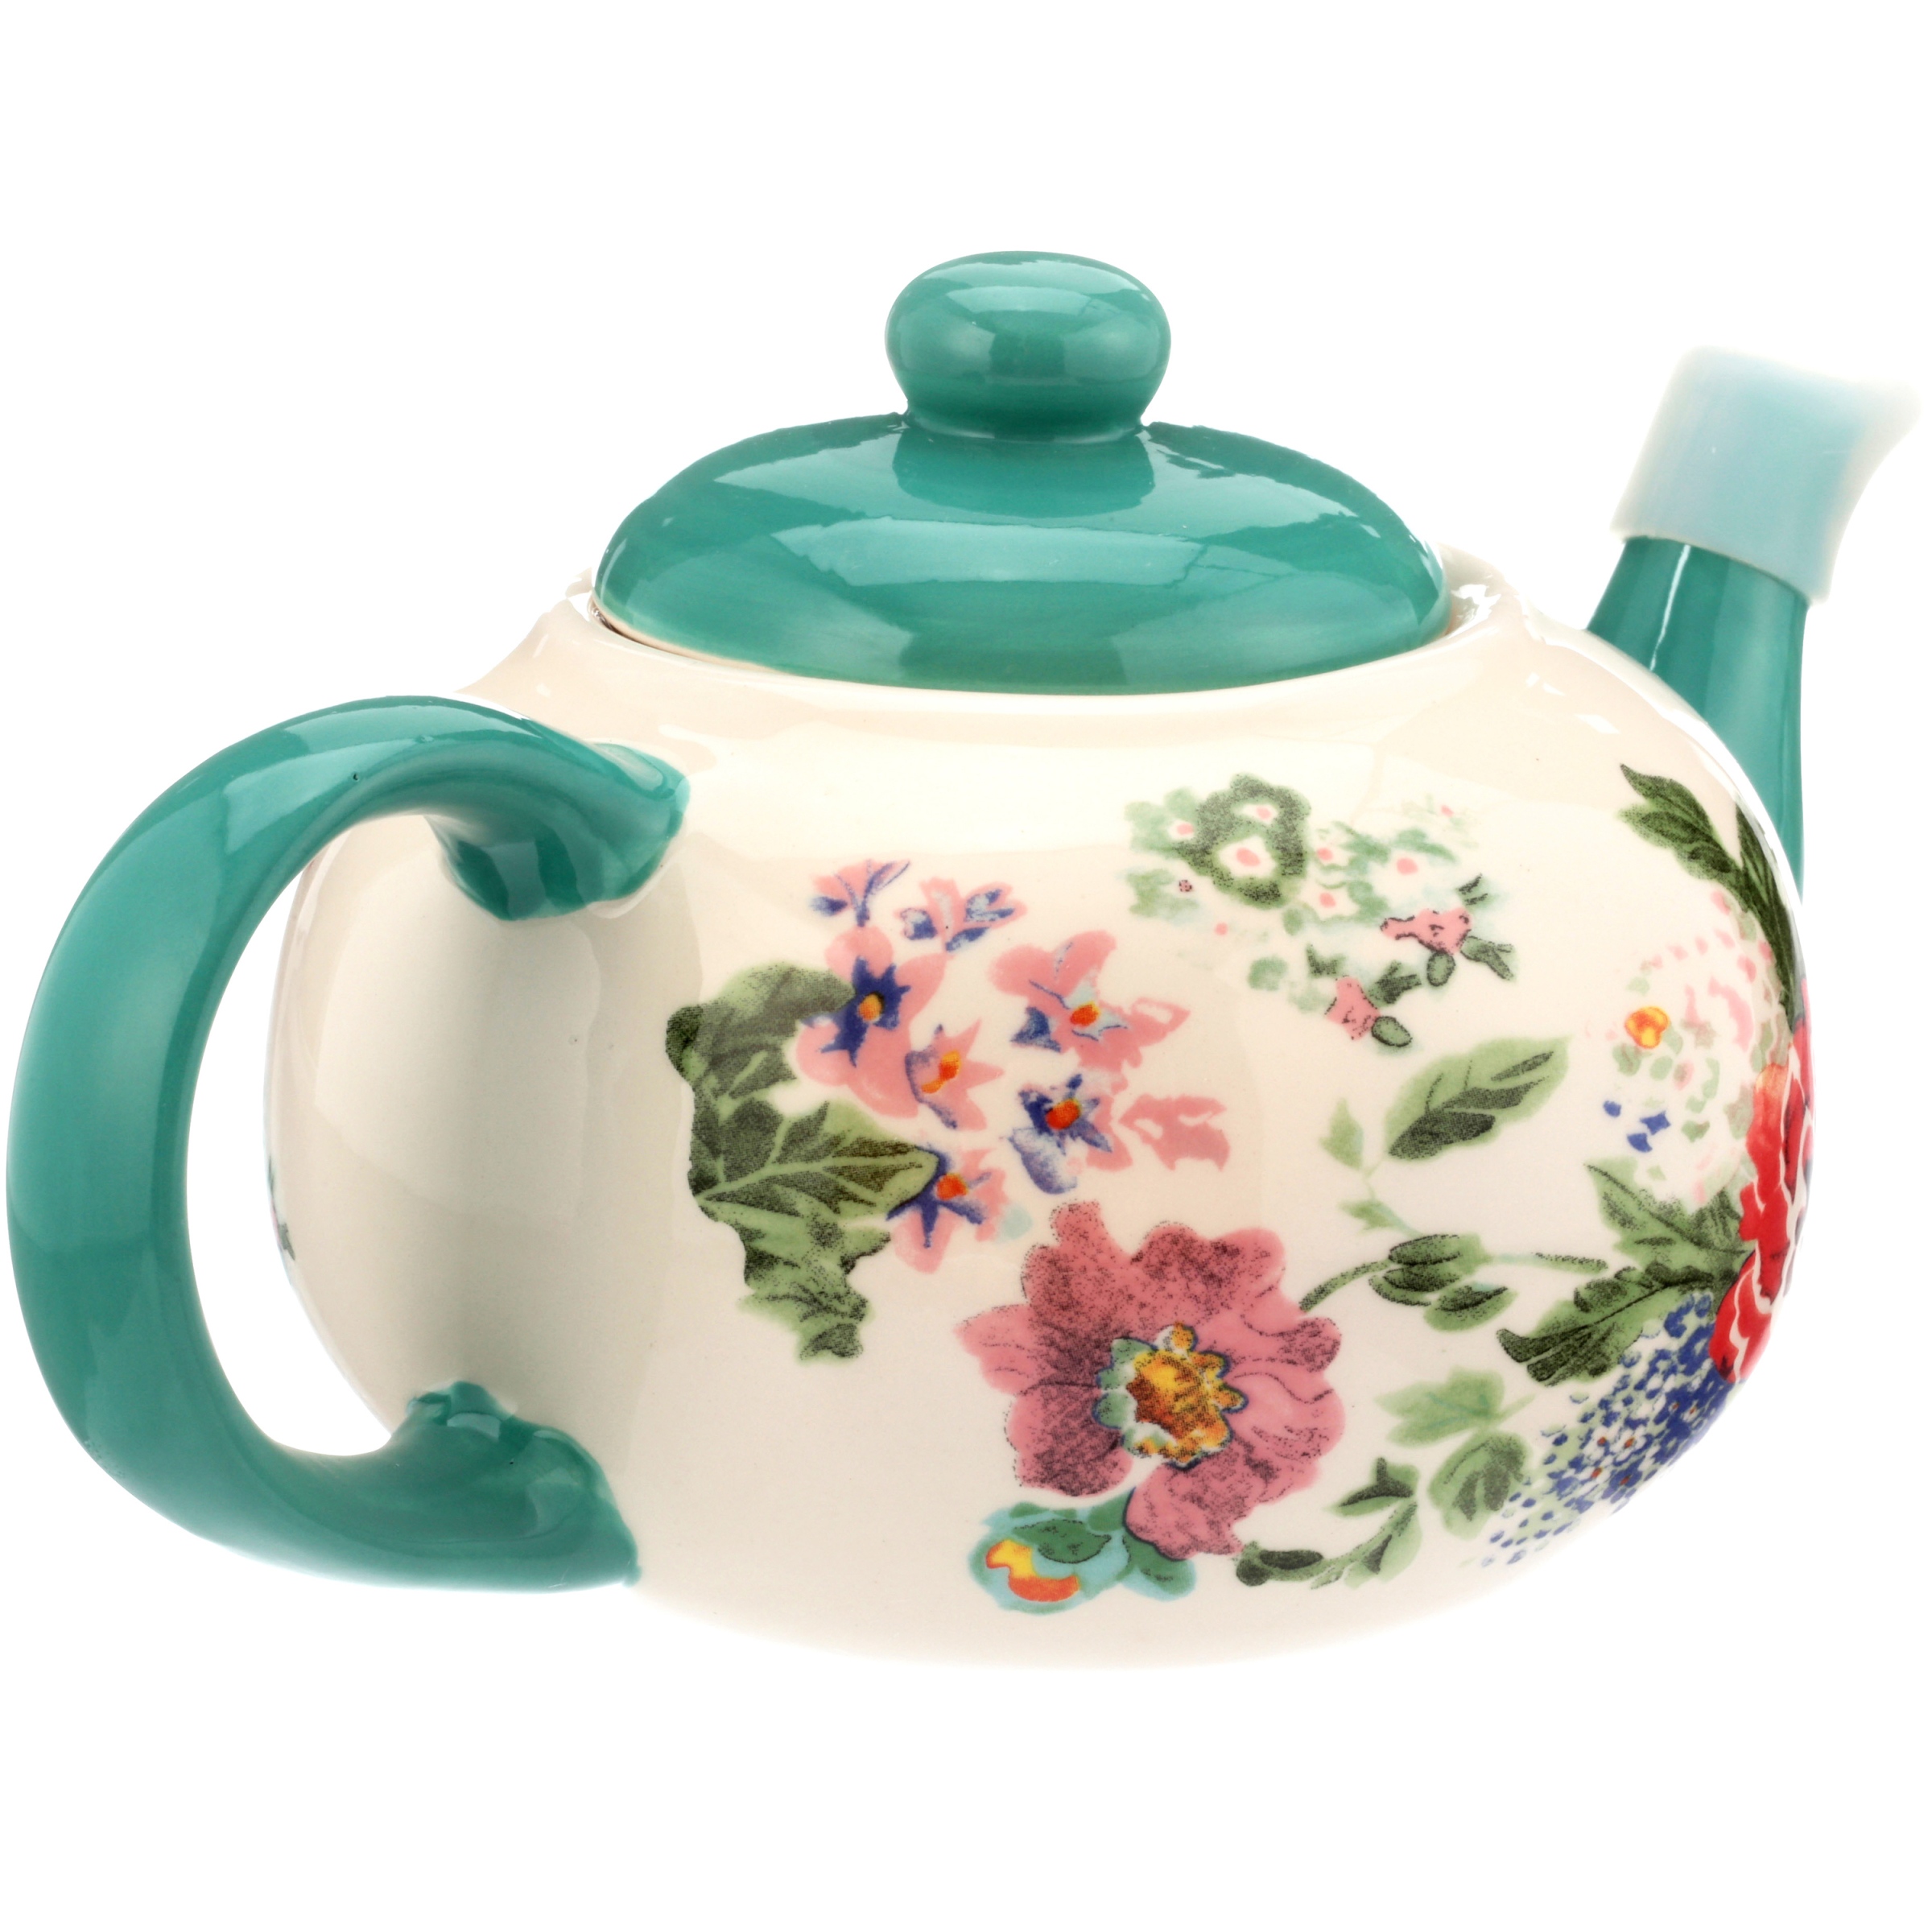 The Pioneer Woman Country Garden Teapot - image 3 of 10